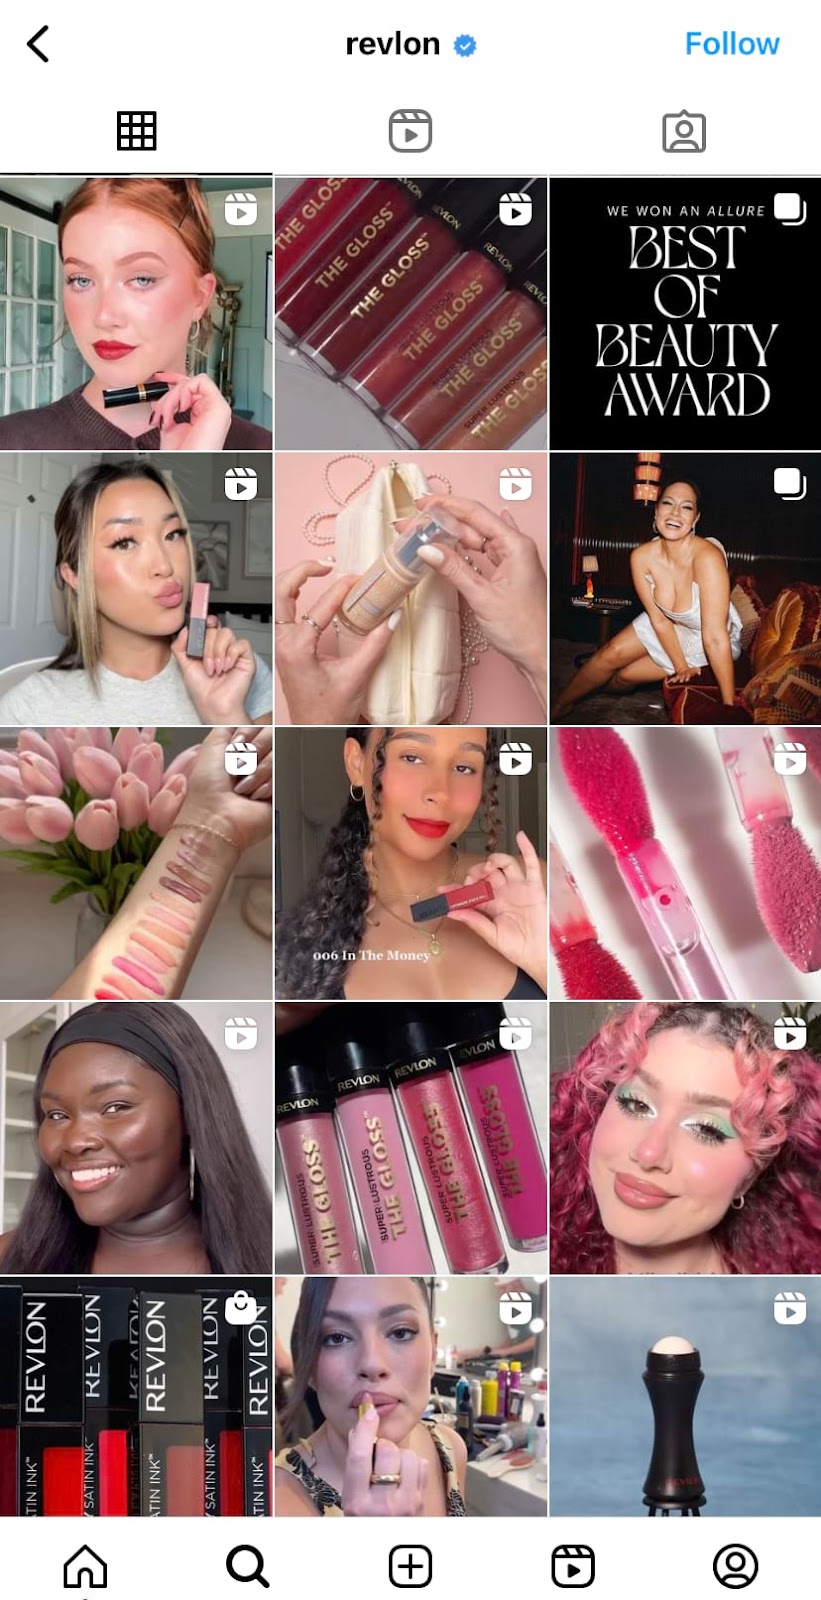 Revlon's posts on Instagram include videos, stories posts, and live sessions